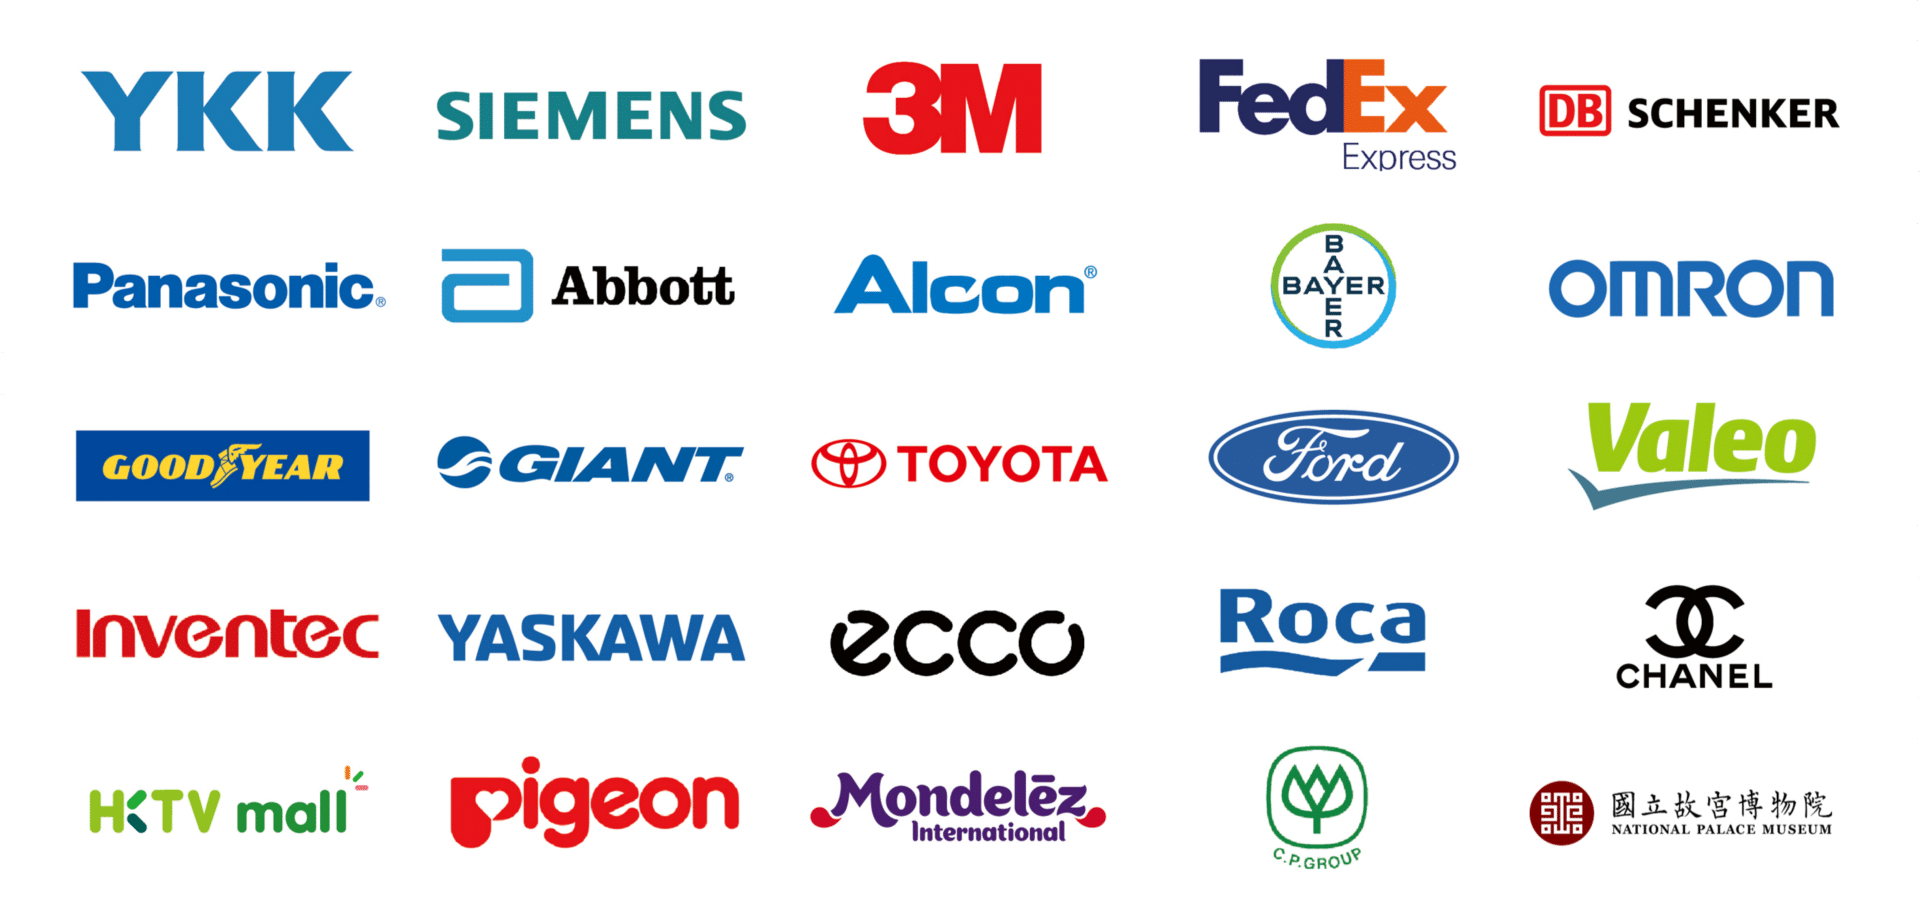 logos of recognizable companies that are customers of Solomon AI and 3D Vision, including Ecco, Toyota, FedEx, Siemens, 3M, and Mondelez